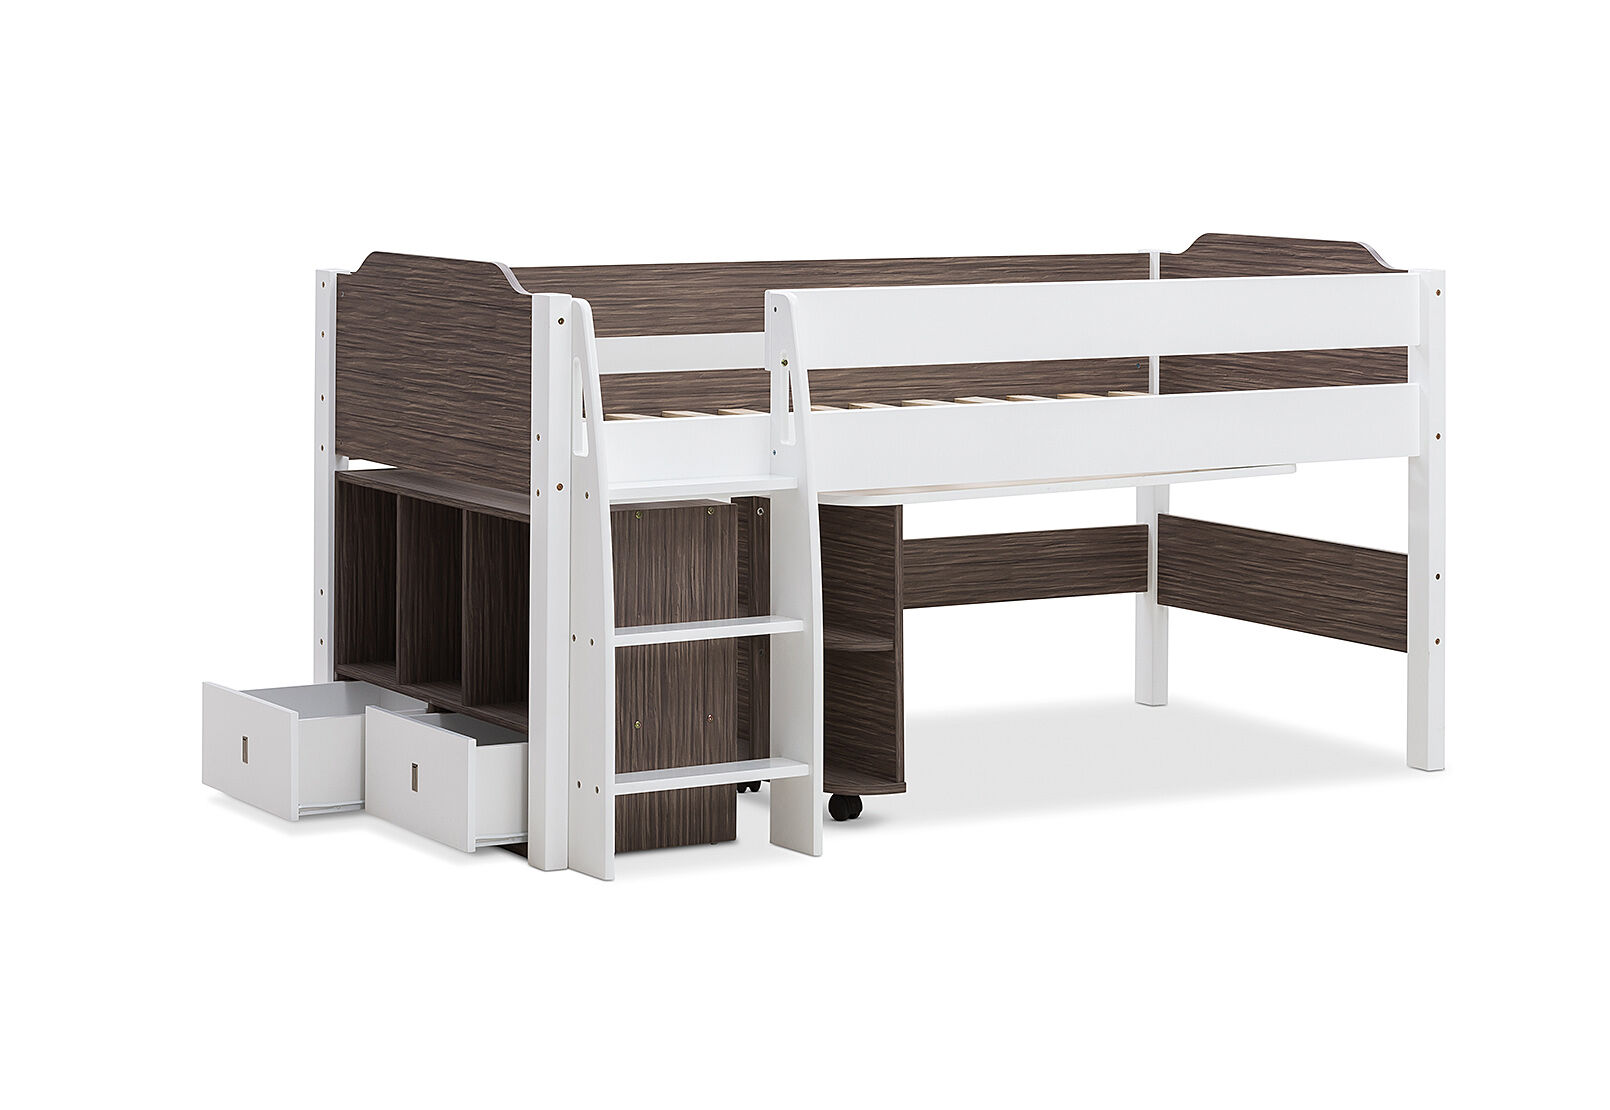 Study Bunk Ryan Amart, Ryan Twin Over Full Stairs Bunk Bed Instructions